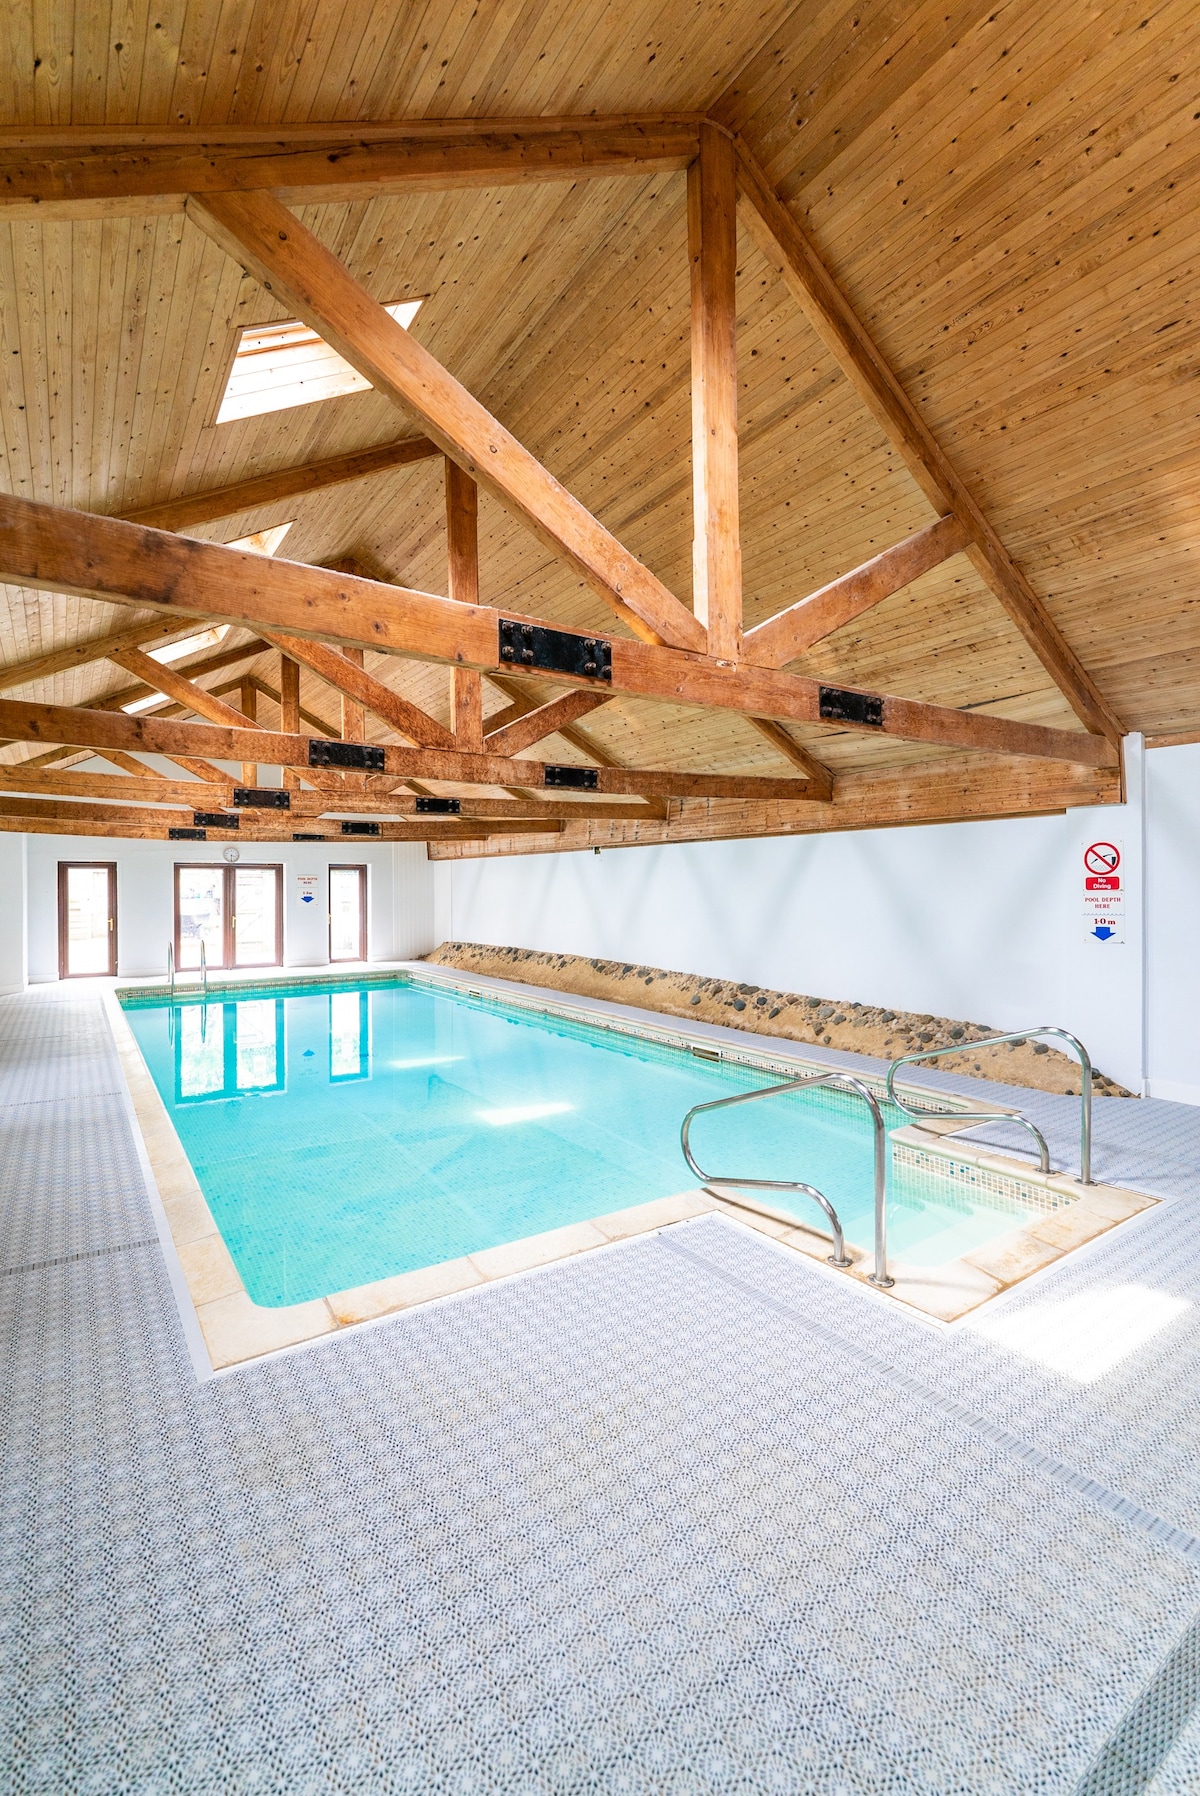 Country Cottage & indoor pool, near Bath